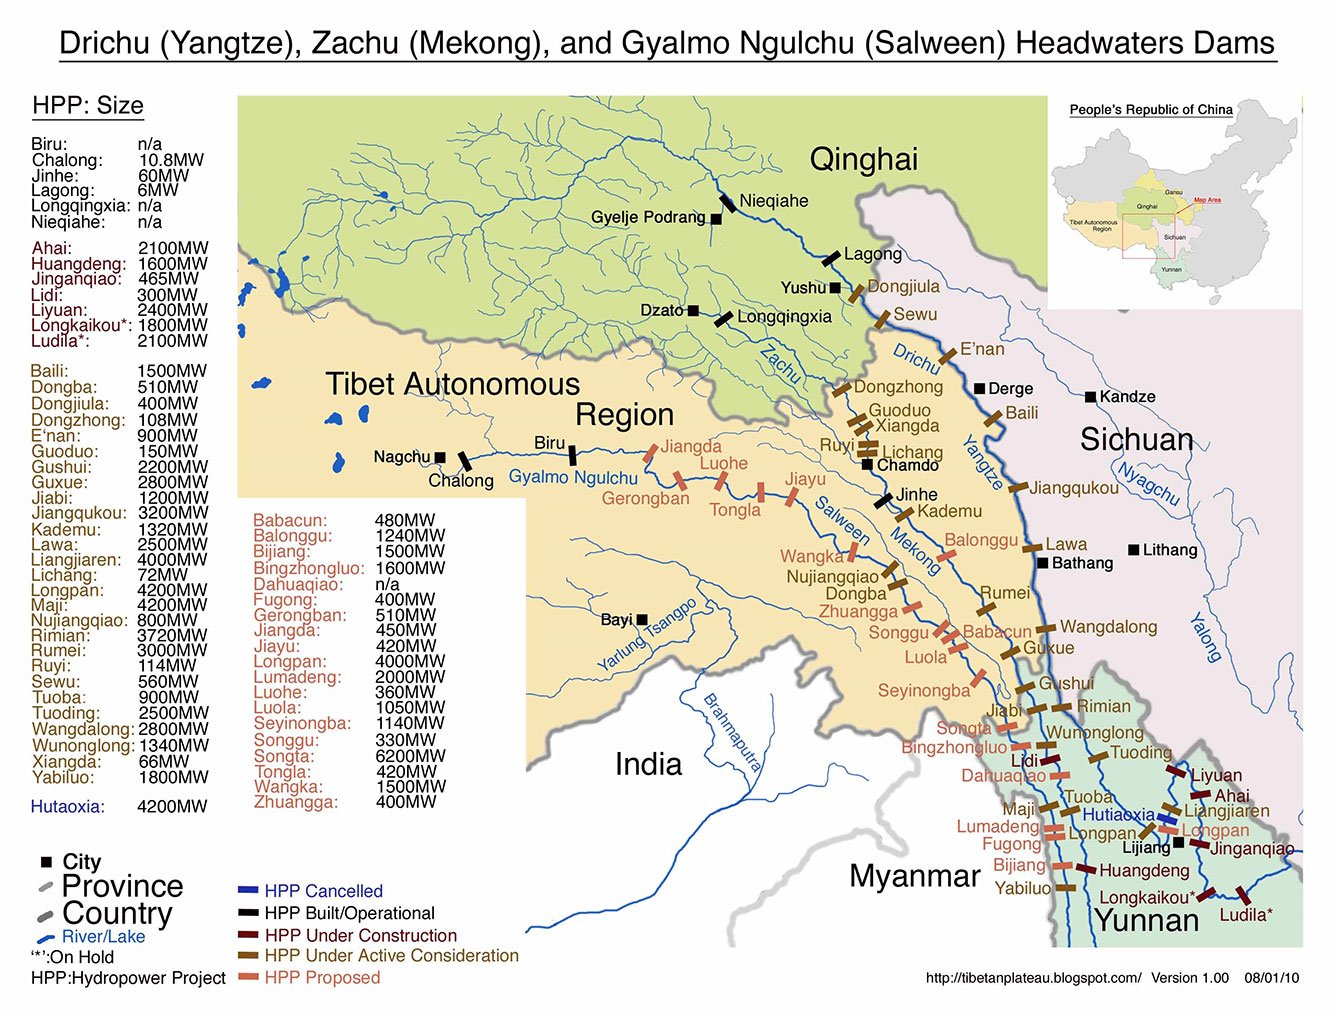 watersheds of the Drichu